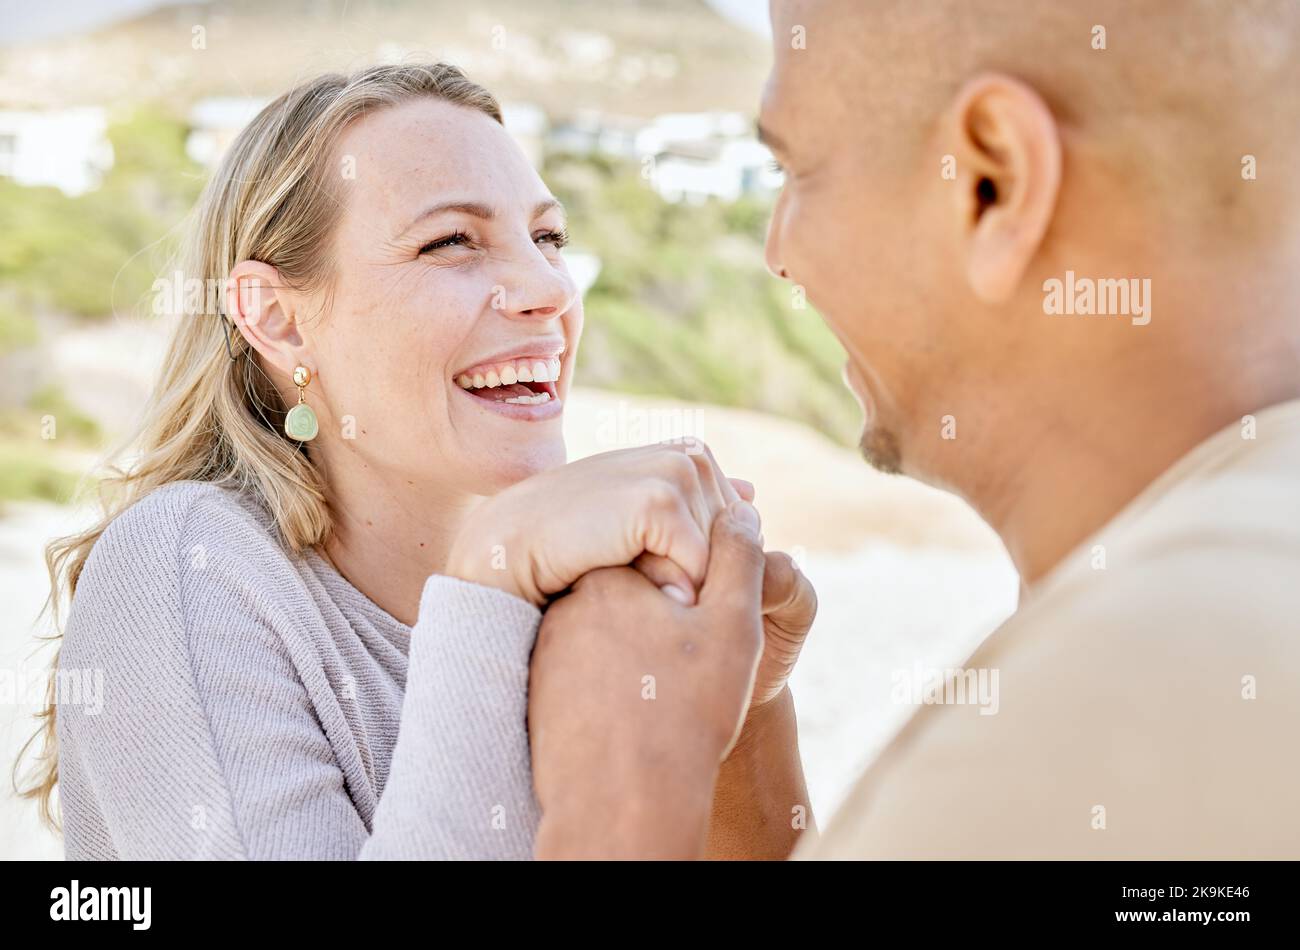 Beach, holding hands and man propose to woman on holiday by sea, happy and smiling together. Affection, romance and multicultural couple by ocean Stock Photo